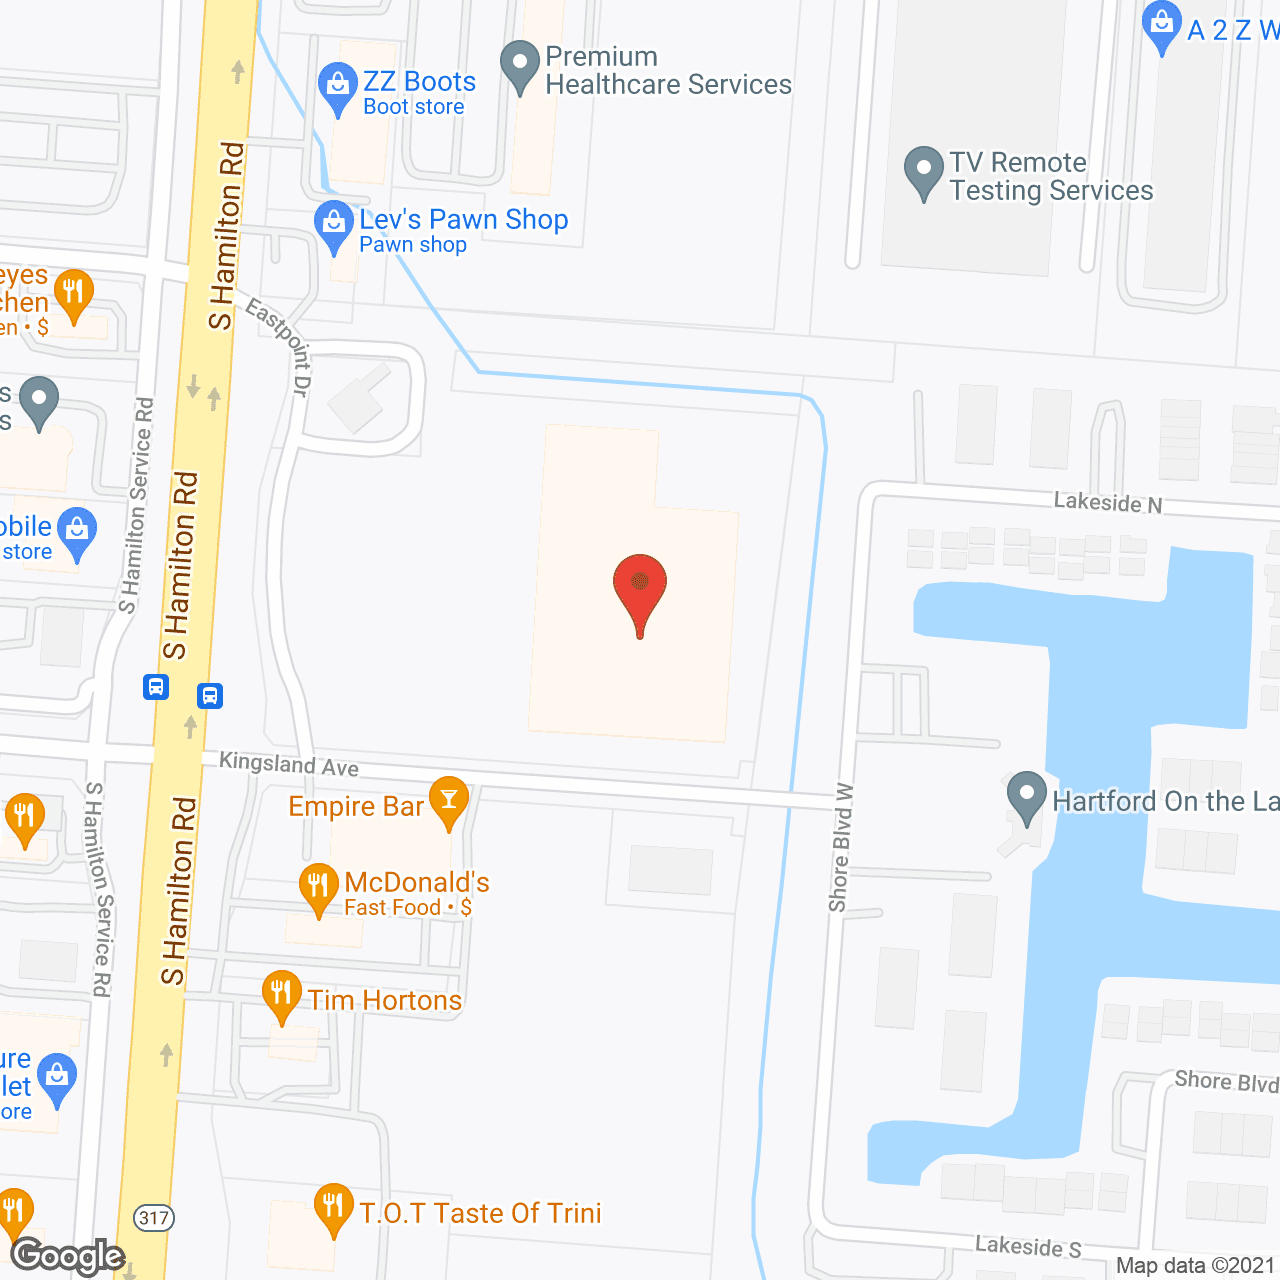 Ambassador Home Health Services in google map